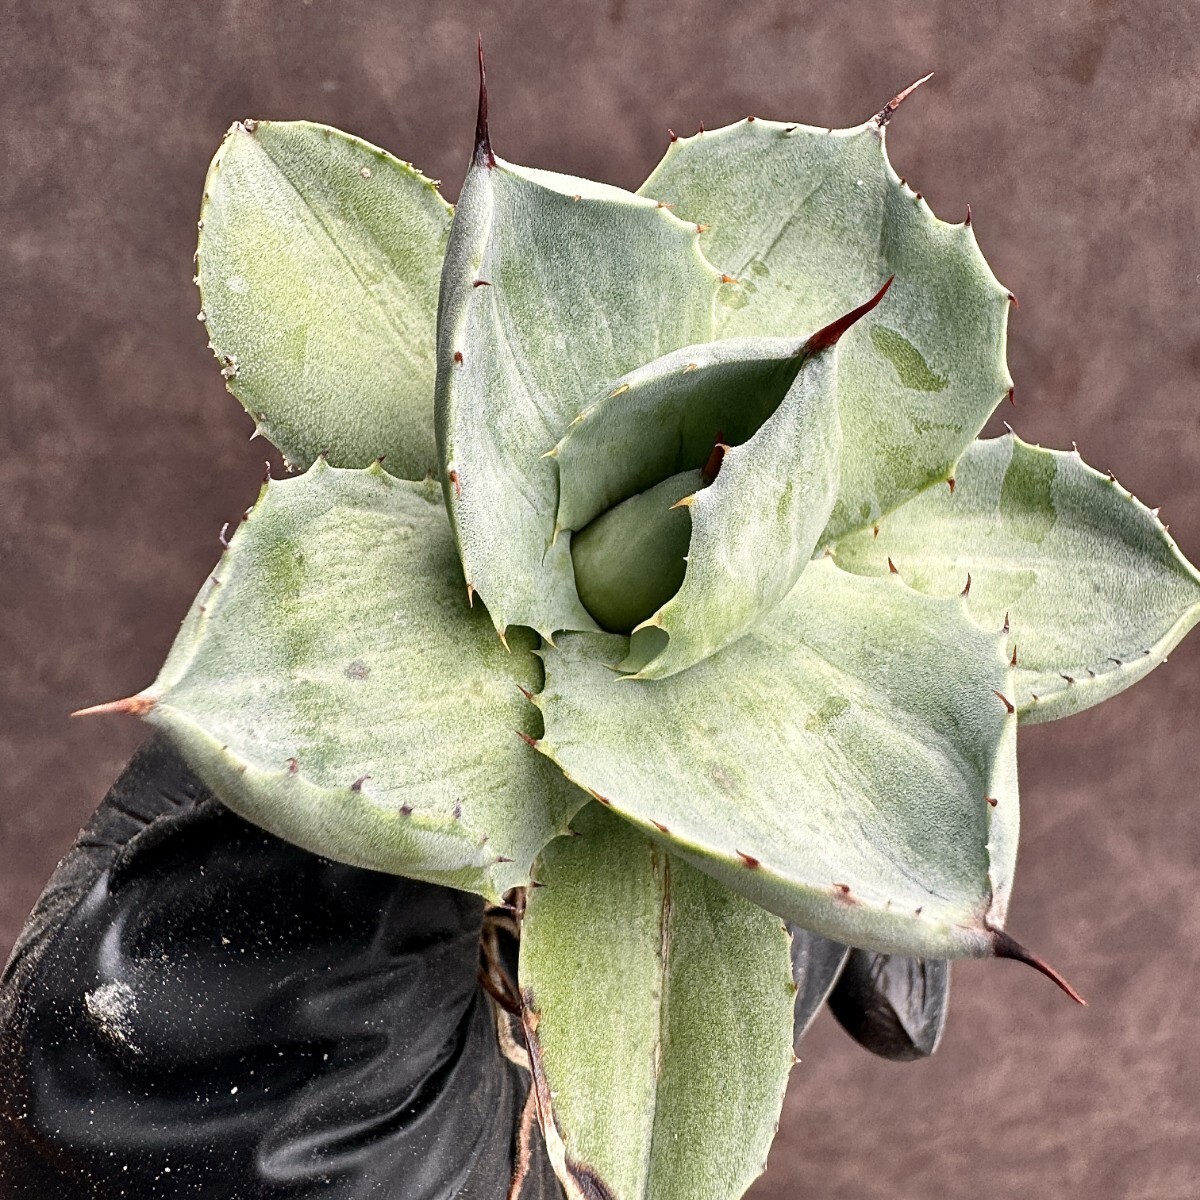 [Lj_plants]H35 succulent plant agave thickness leaf . god .... special unevenness . entering finest quality stock ultra rare! limitation stock 